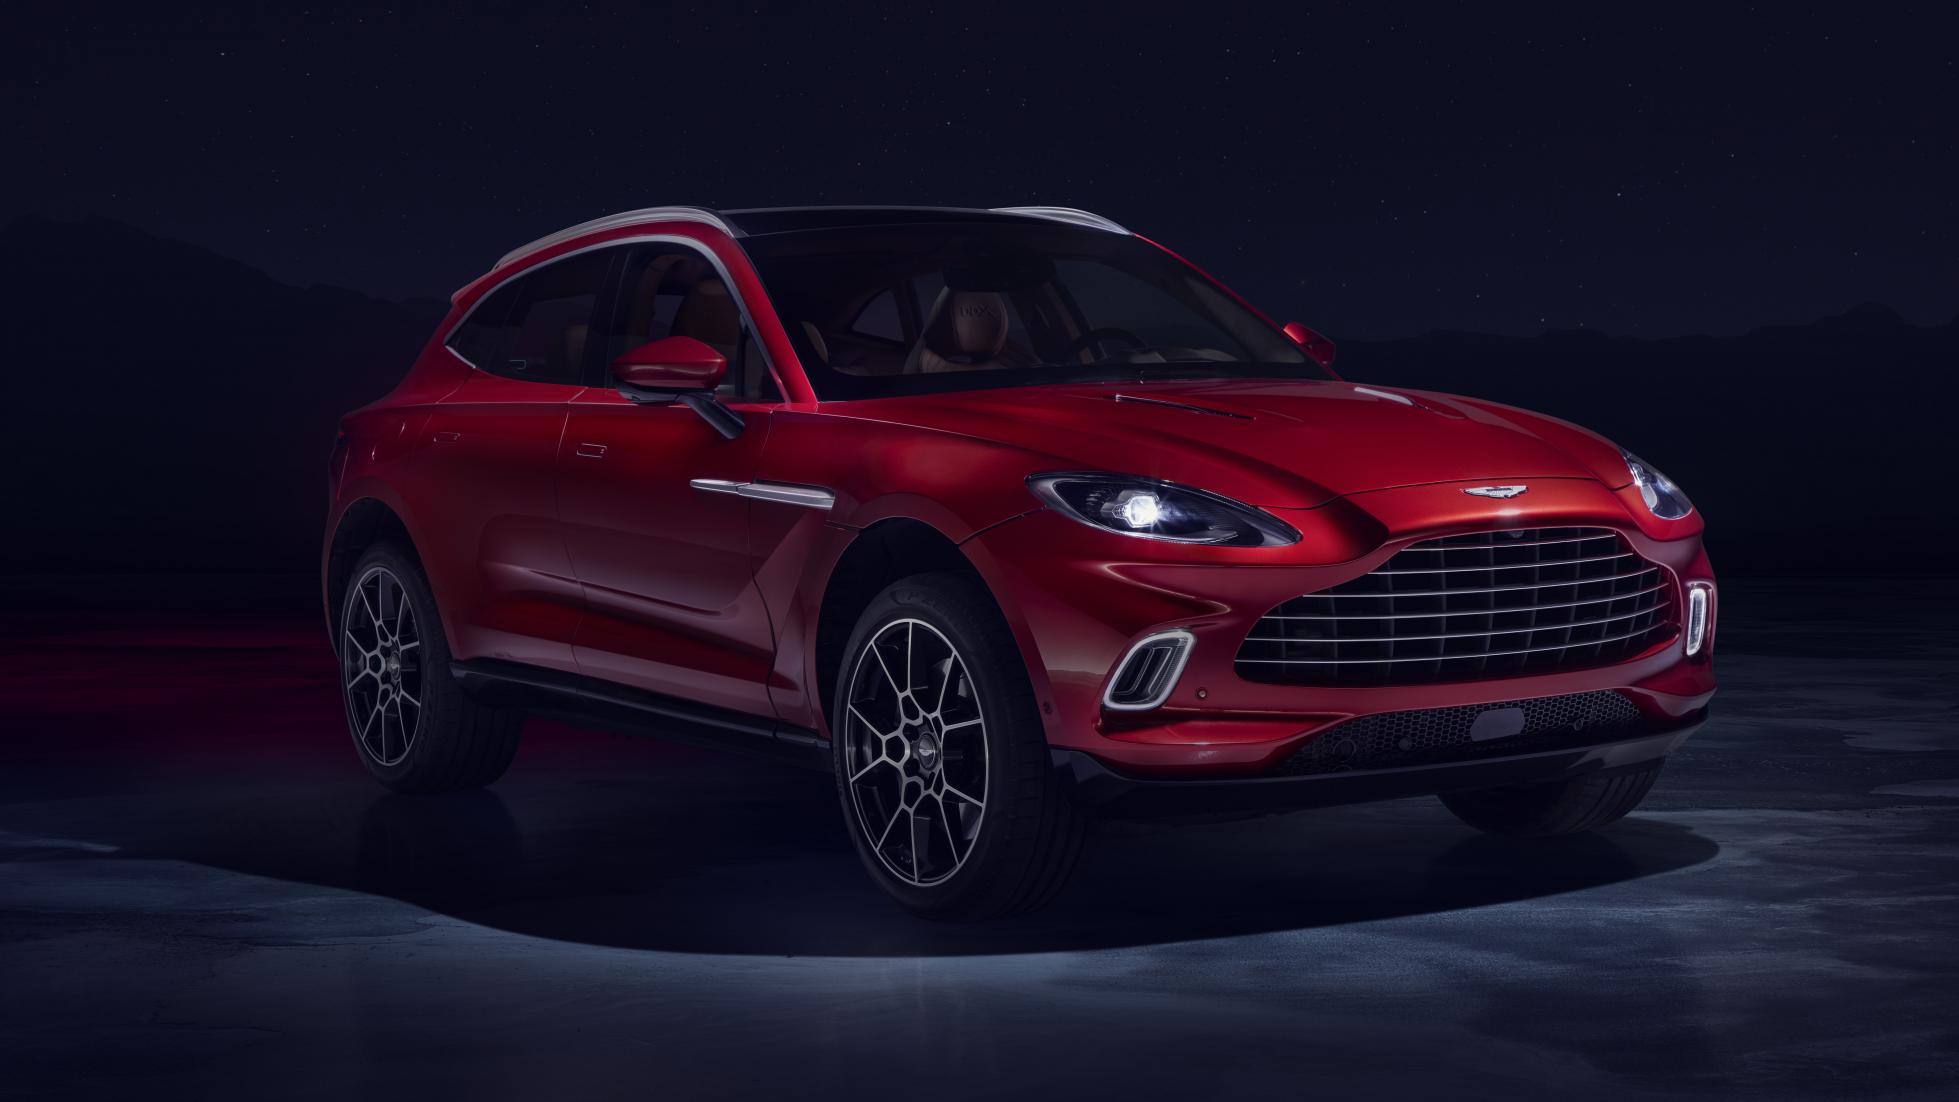 You can now book the all-new 542bhp Aston Martin DBX in Malaysia